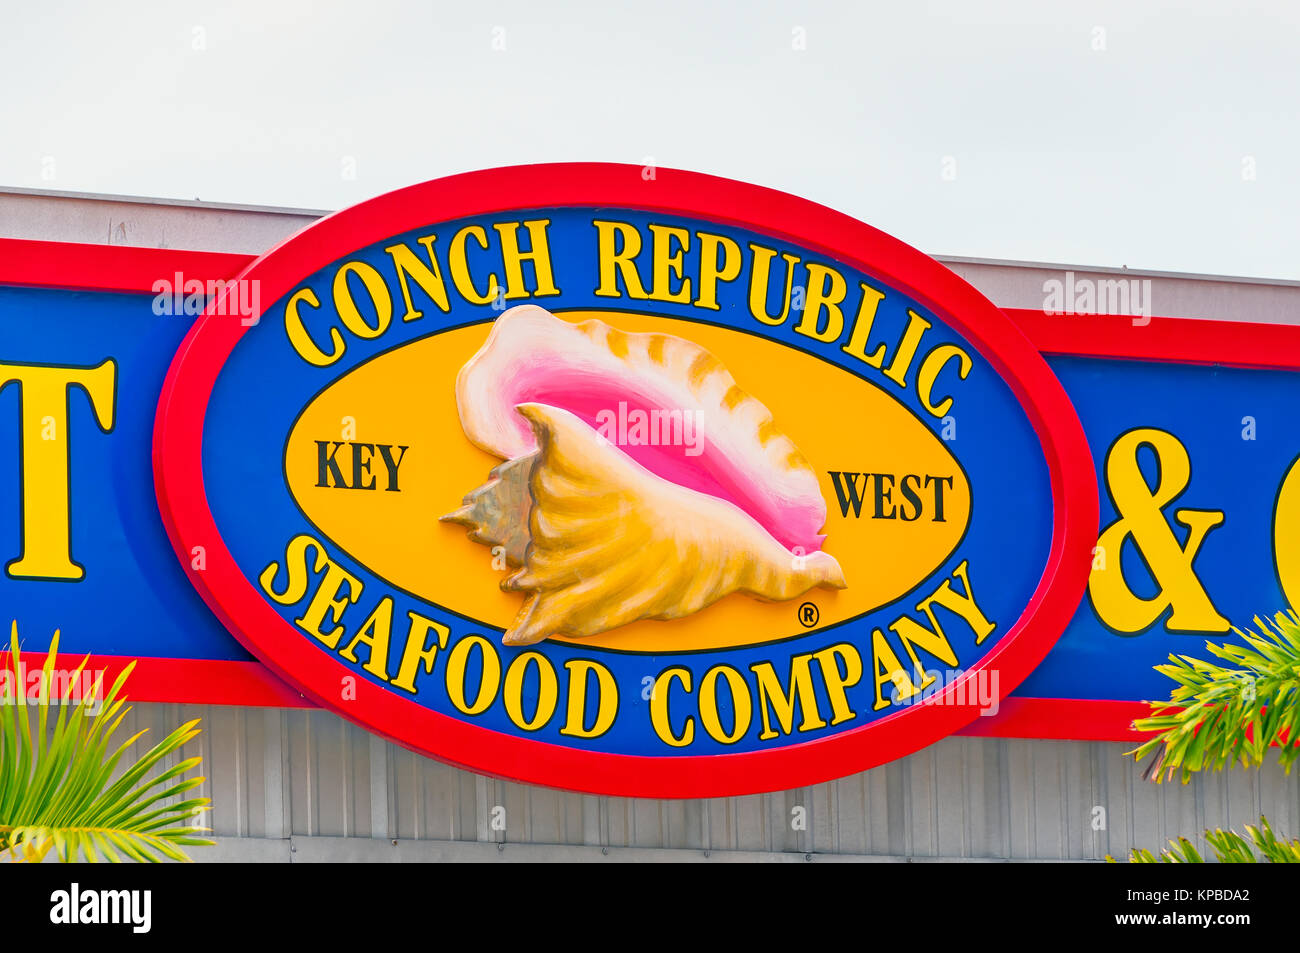 Conch Republic Seafood Company   restaurant and entertainment complex Key West, Florida Stock Photo